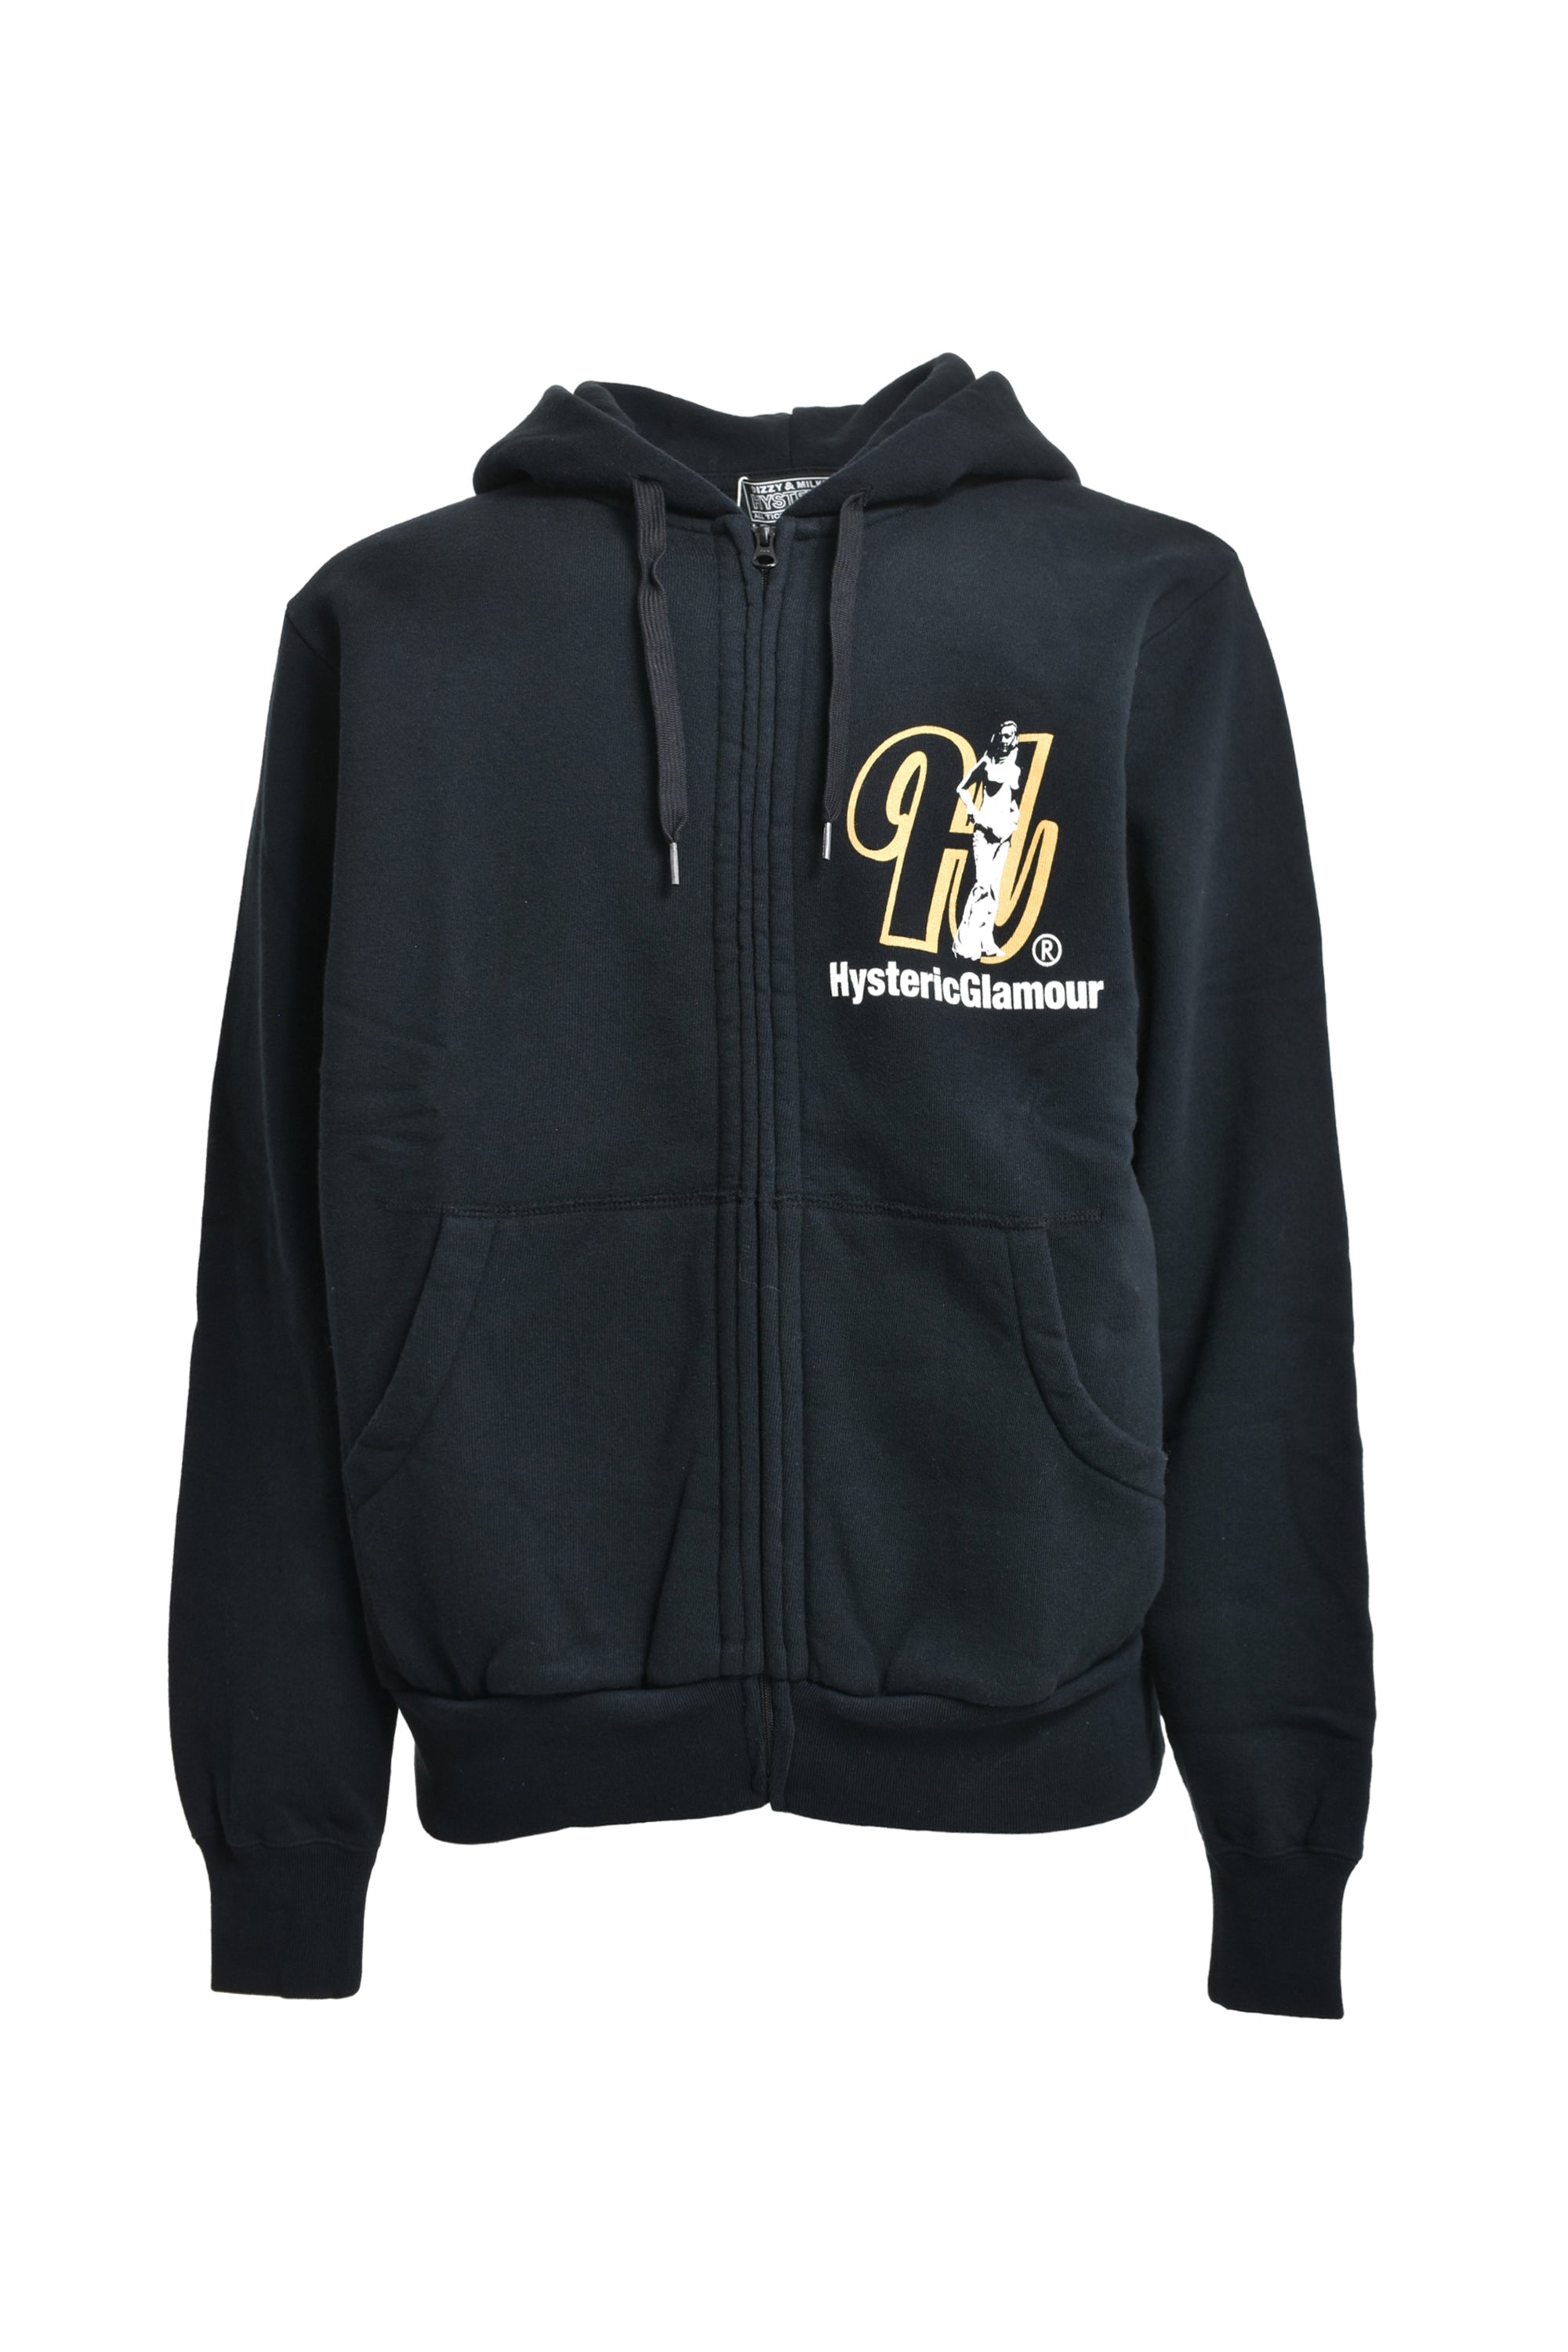 HYSTERIC GLAMOUR ヒステリックグラマー FW23 I'M HYSTERIC IT ZIP